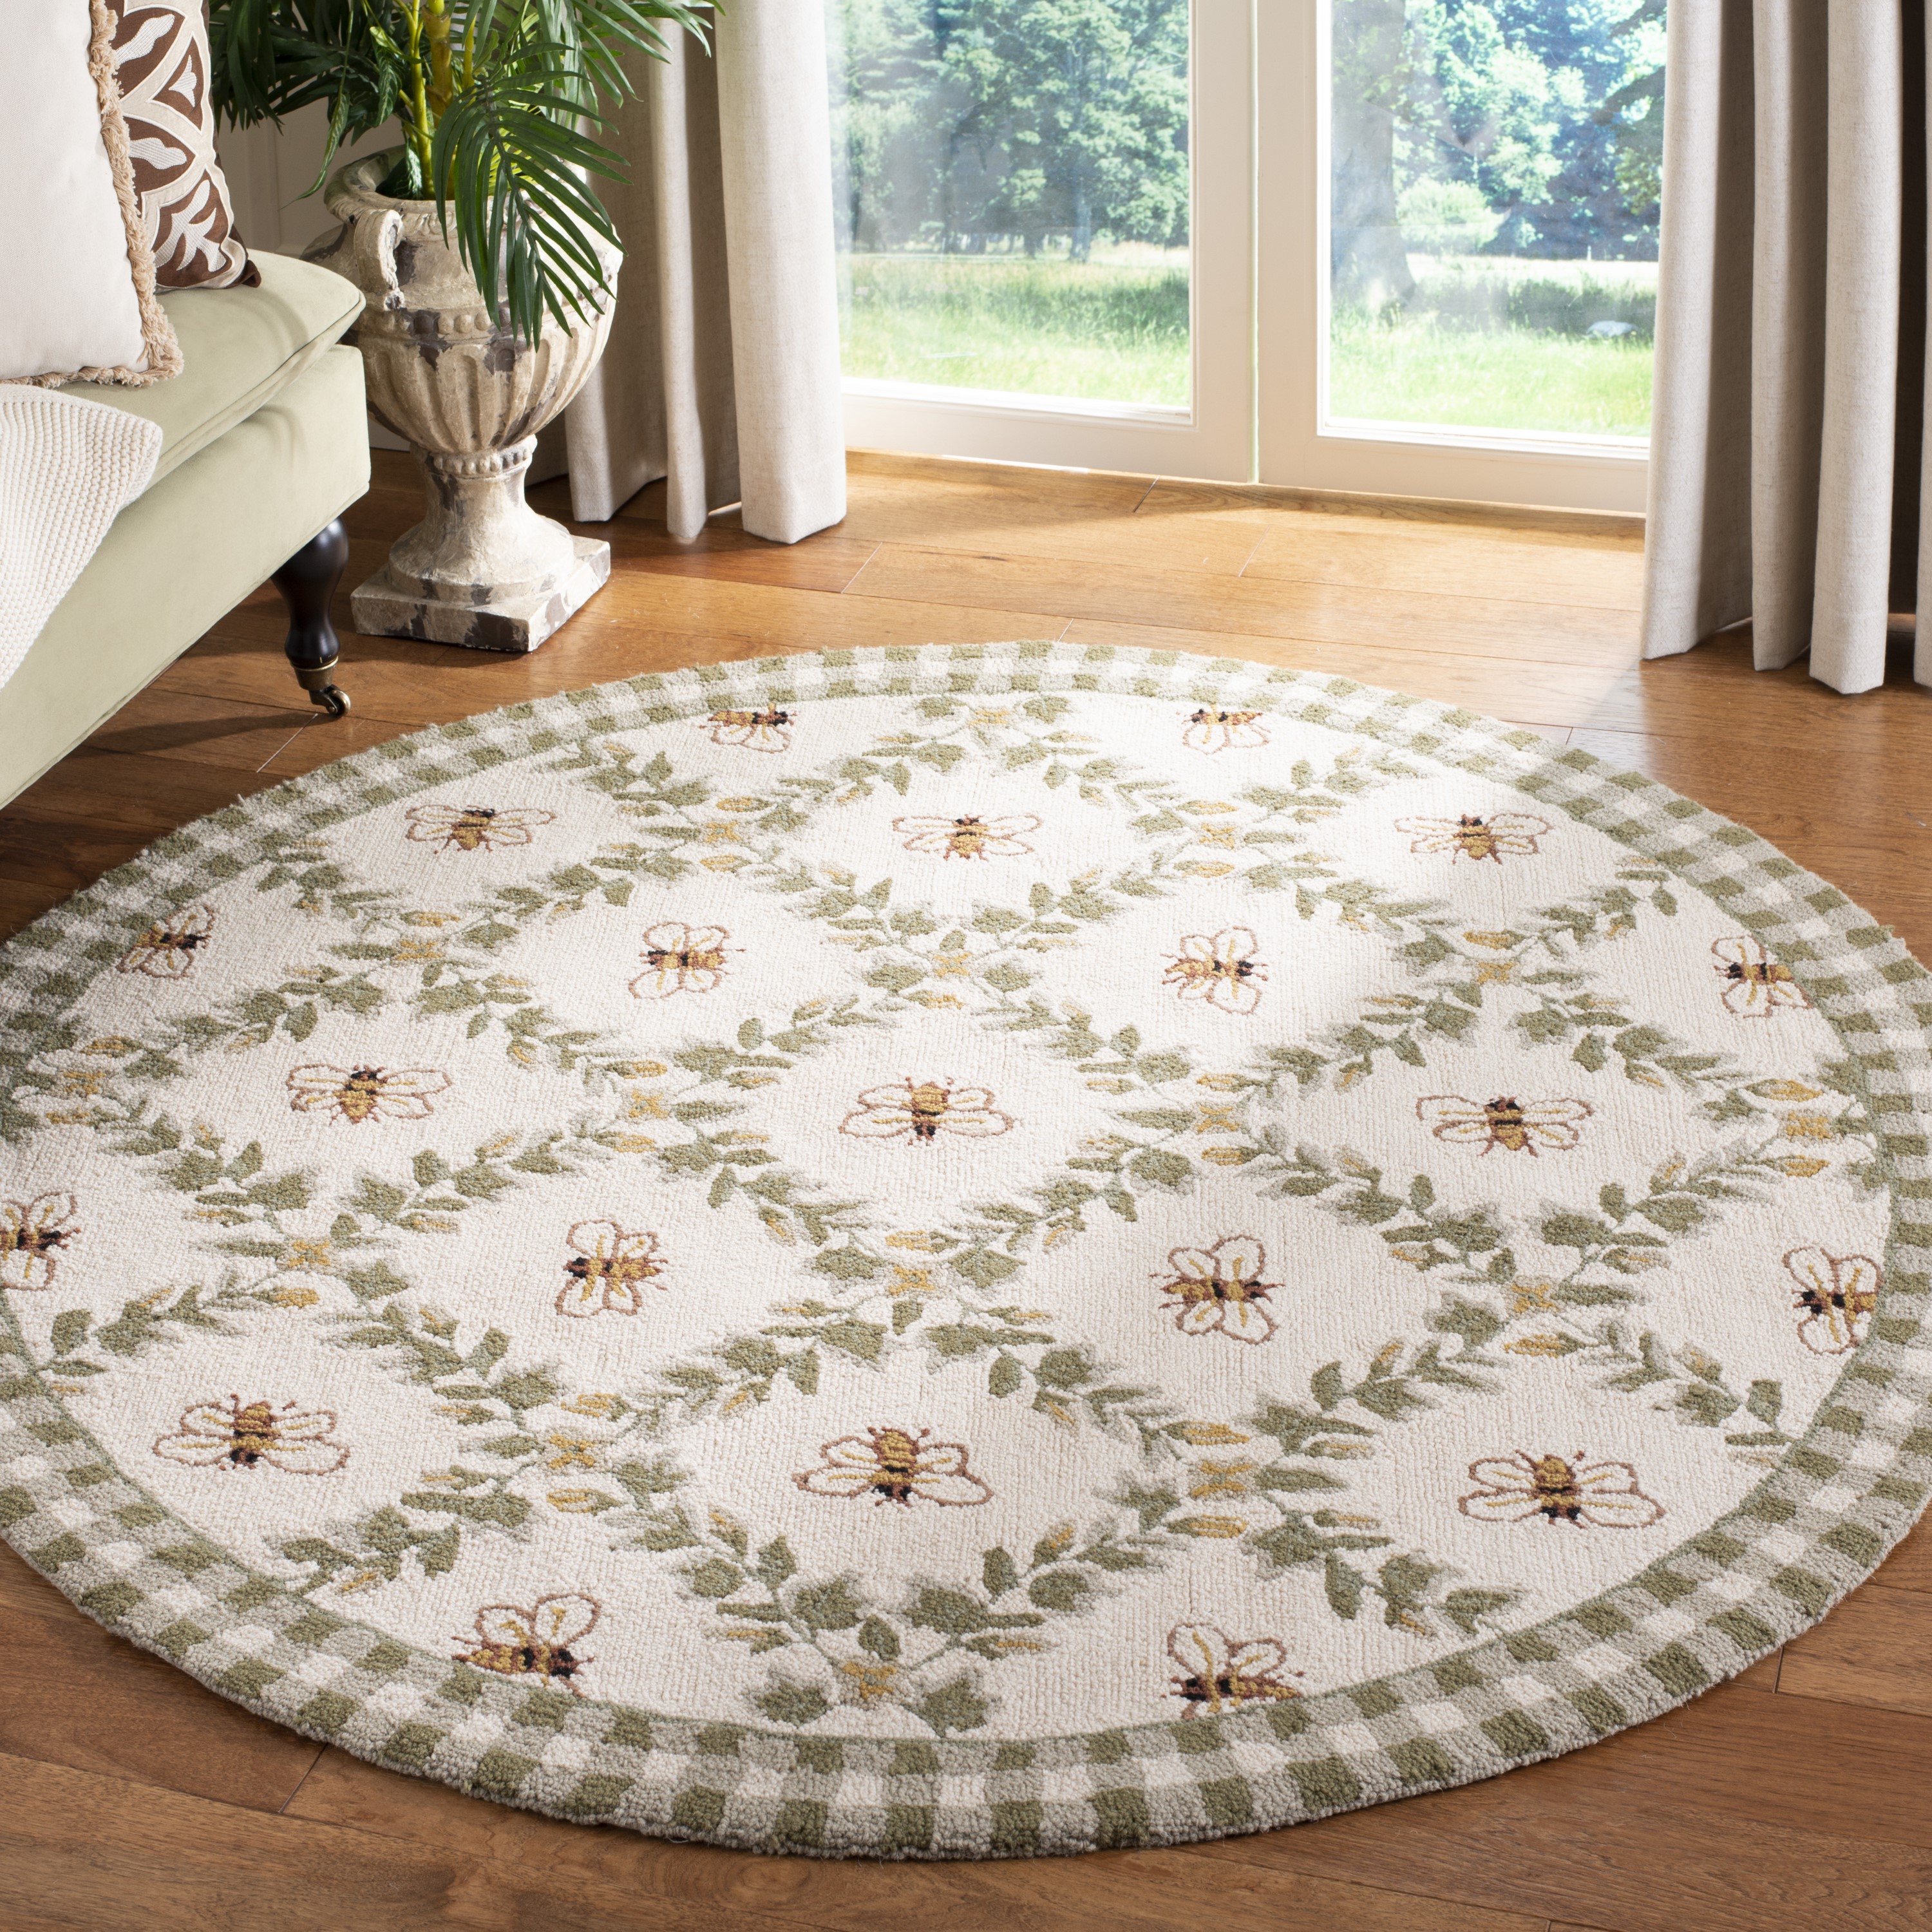 Safavieh Chelsea Lattice 4 X 4 (ft) Wool Ivory/Light Green Round Indoor  Floral/Botanical Tropical Area Rug in the Rugs department at